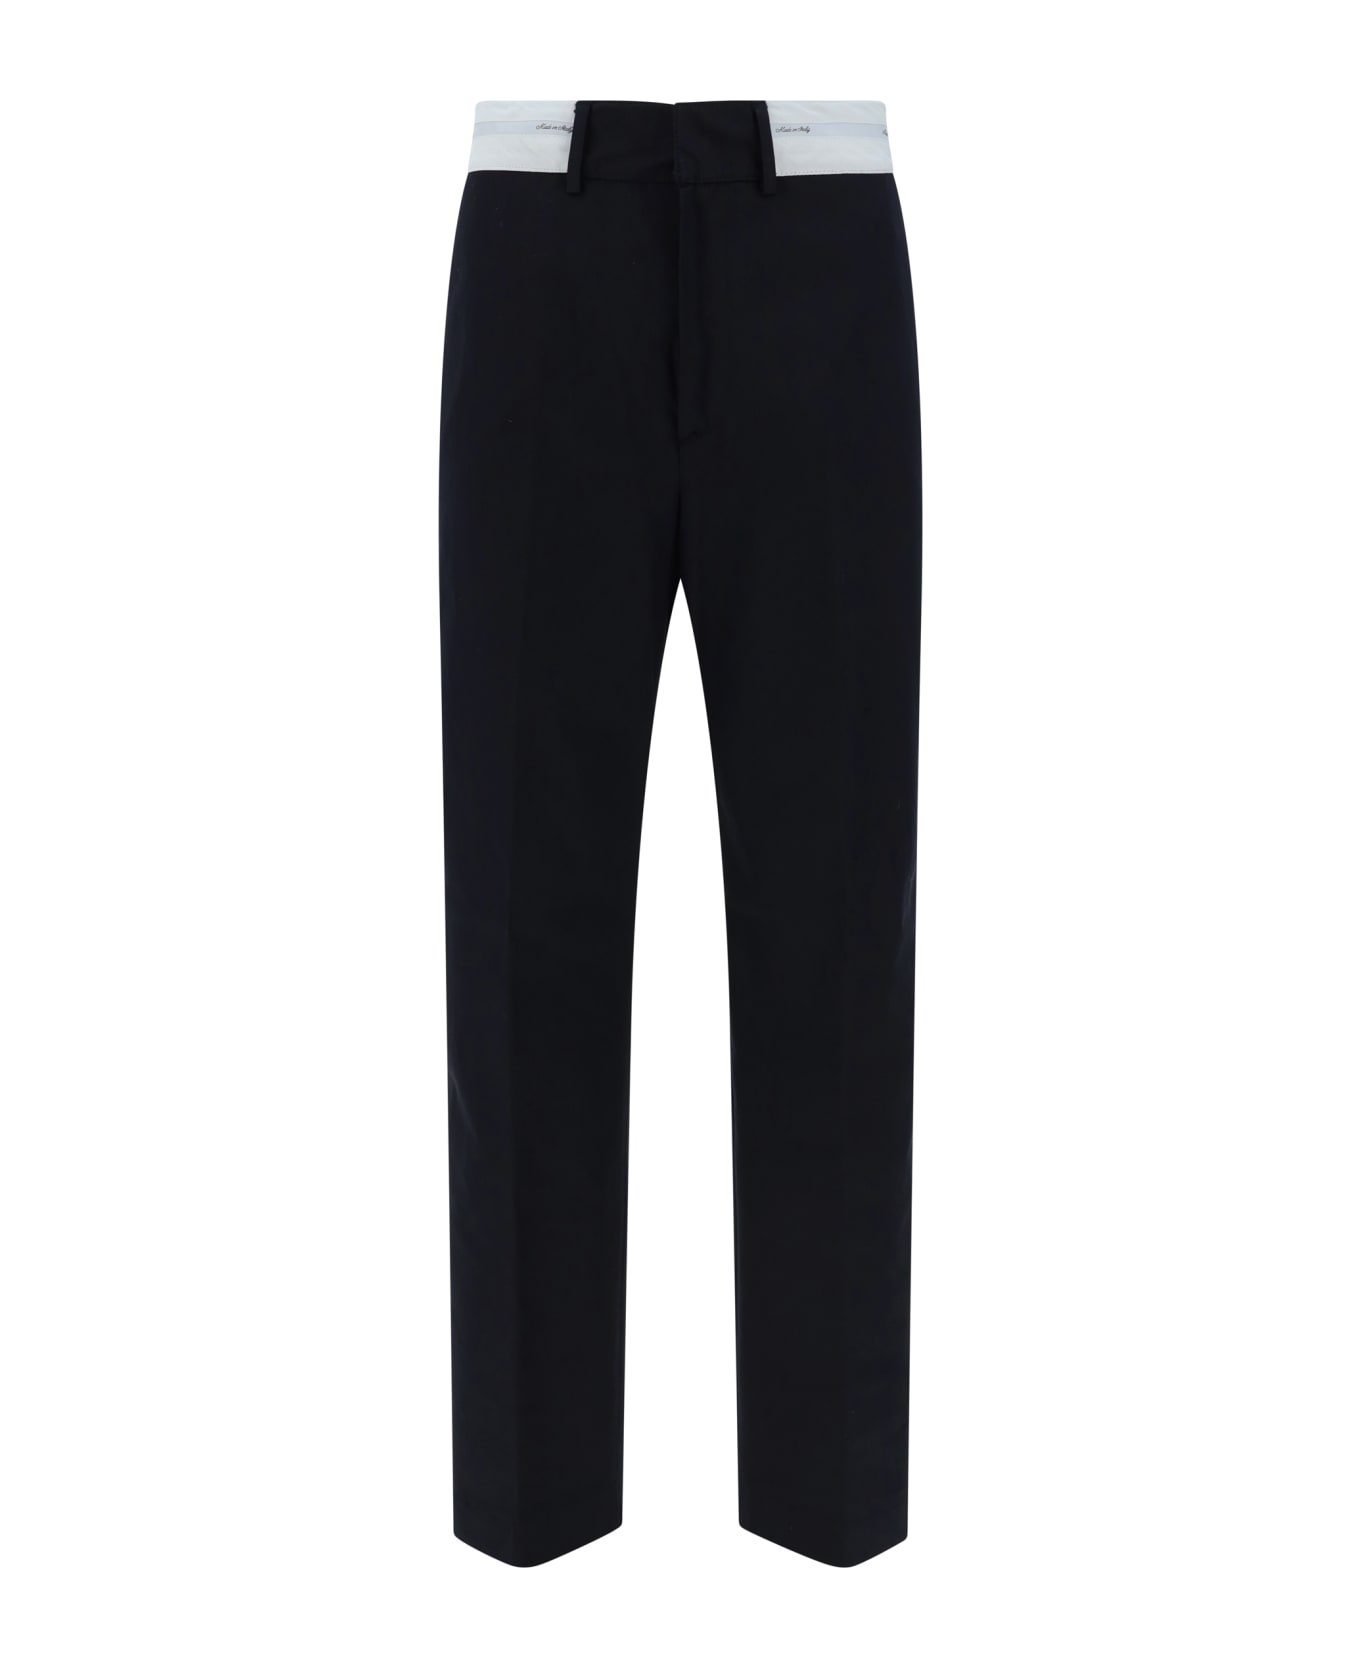 Palm Angels Tailored Trousers With Contrast Waist - Black Off White ボトムス